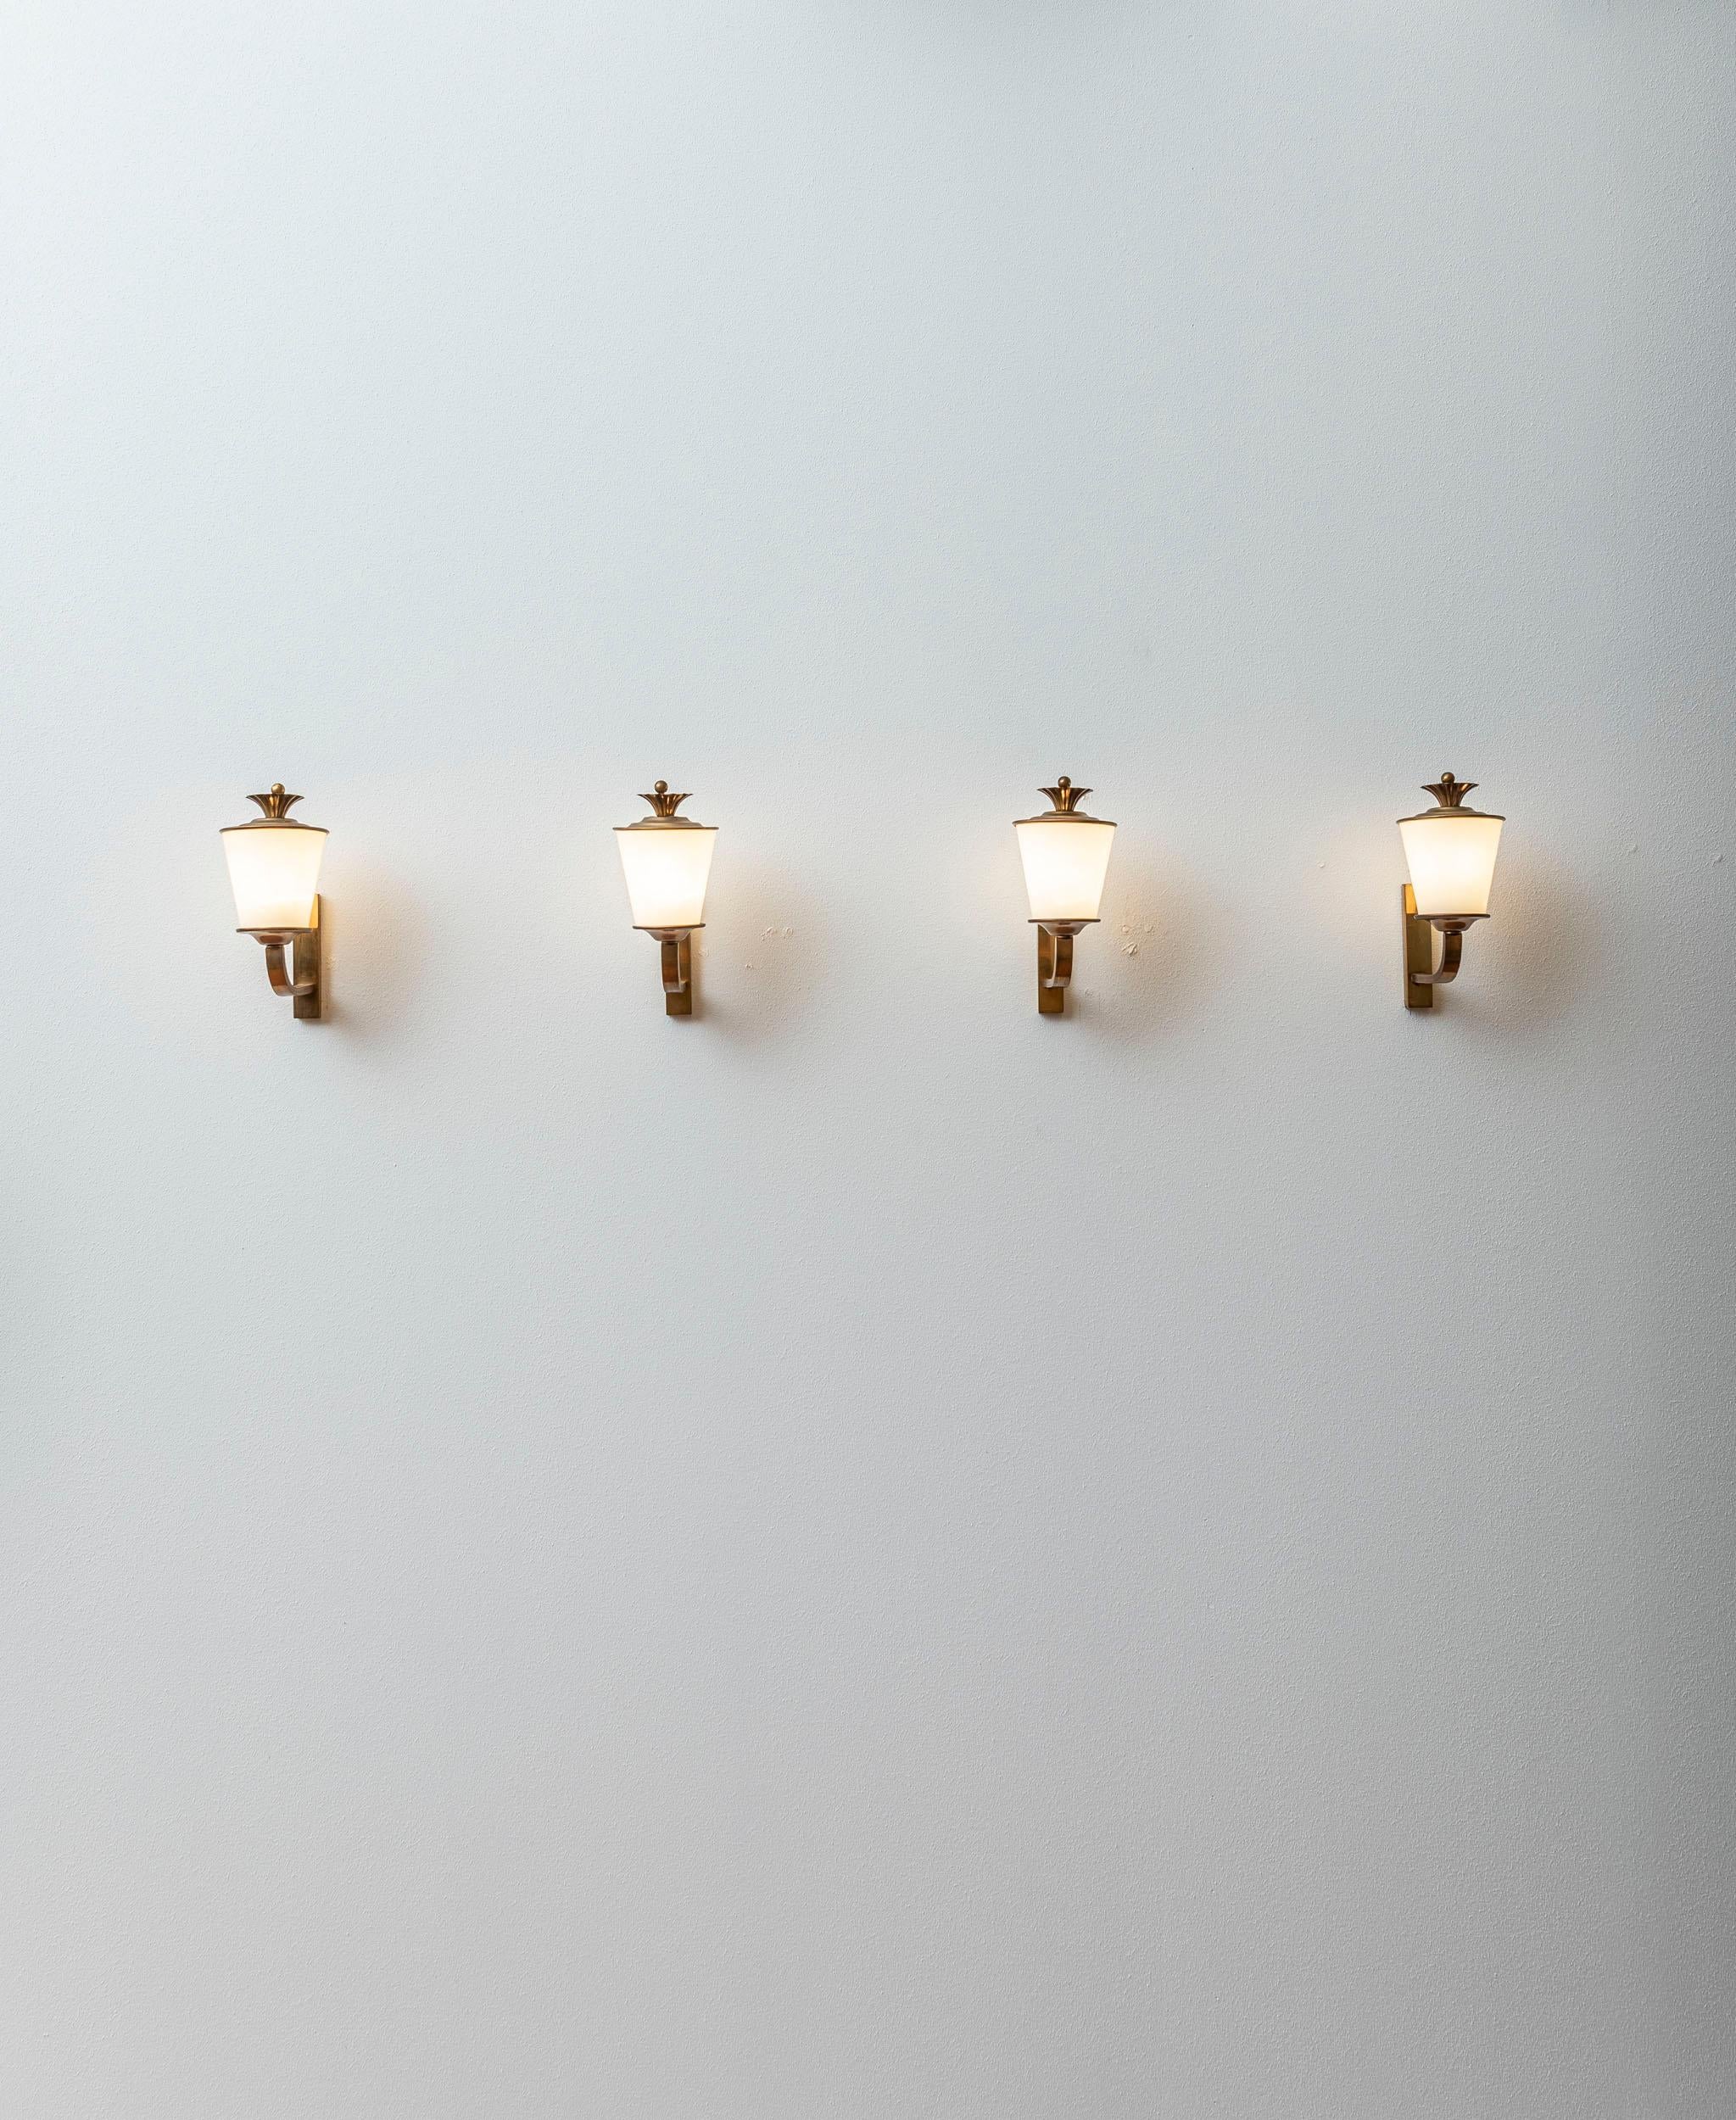 Opaline glass and brass wall lights attributed to Paolo Buffa.
Rare set of four sconces, elegant and charming items.
The brass details on the heads of the opaline shades give a glamorous touch of elegance.